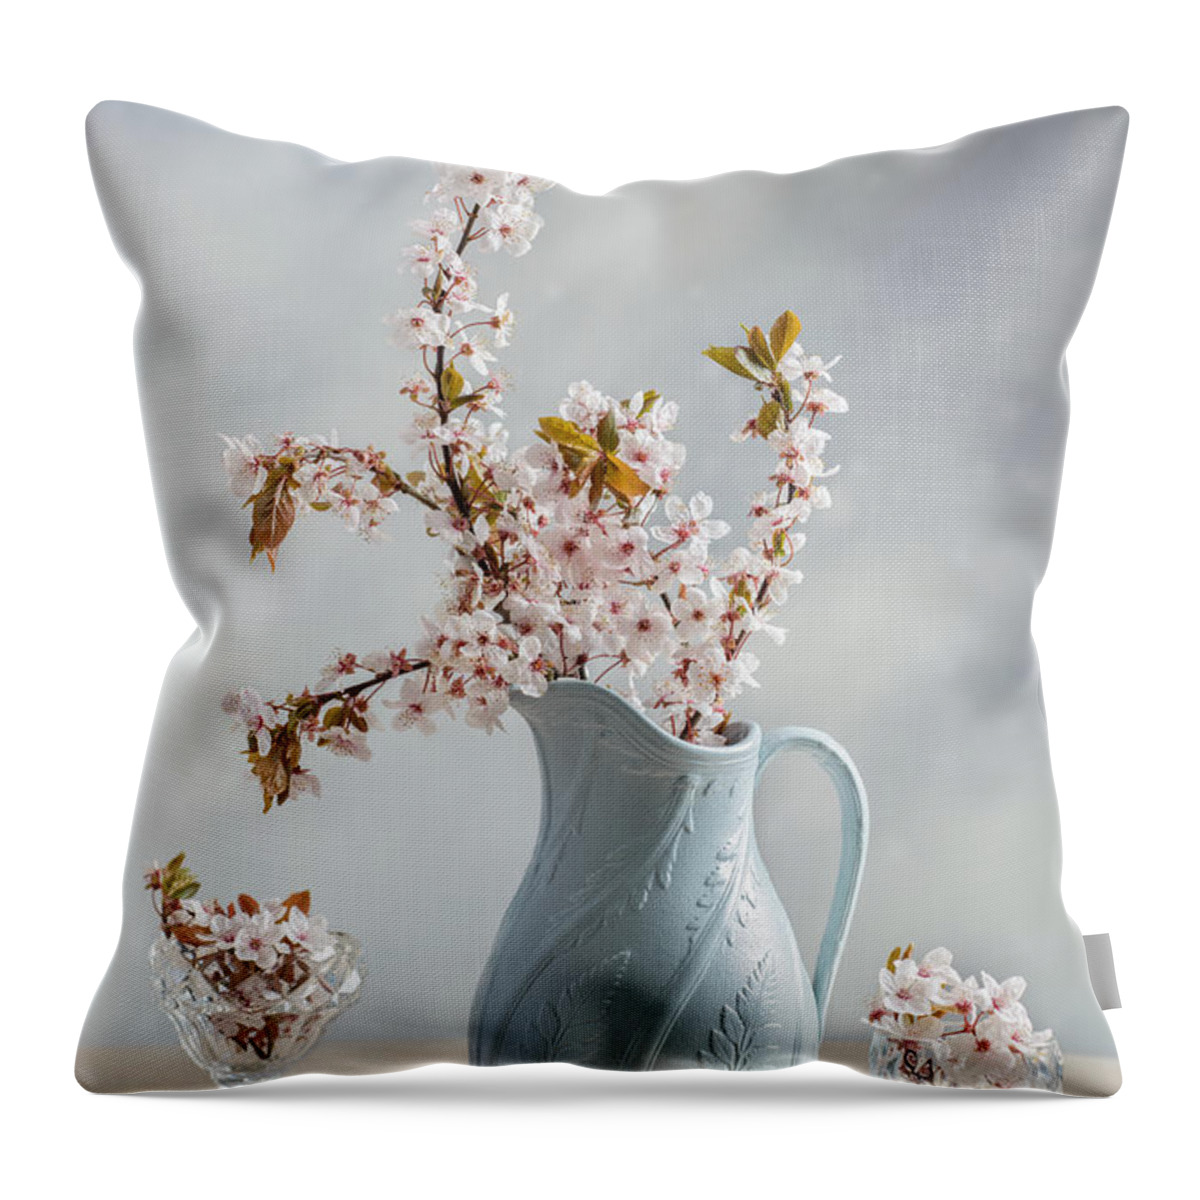 Antique Jug With Blossom Throw Pillow For Sale By Amanda Elwell 16 X 16